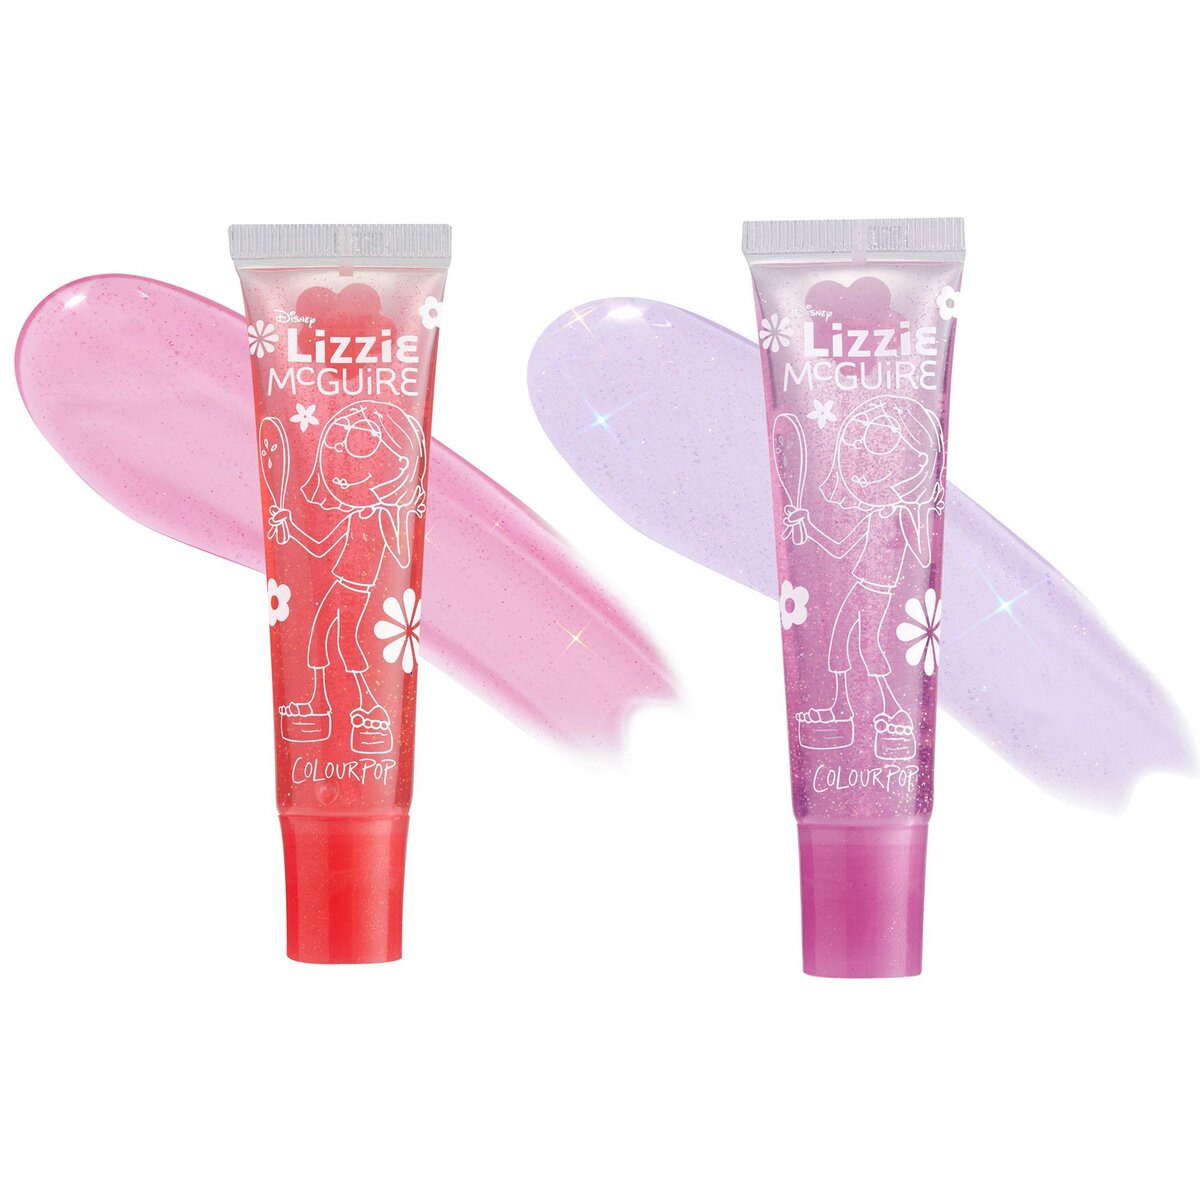 KIT GLOSS SERIOUSLY COOL PLUMPING - COLOUR POP X LIZZIE MCGUIRE